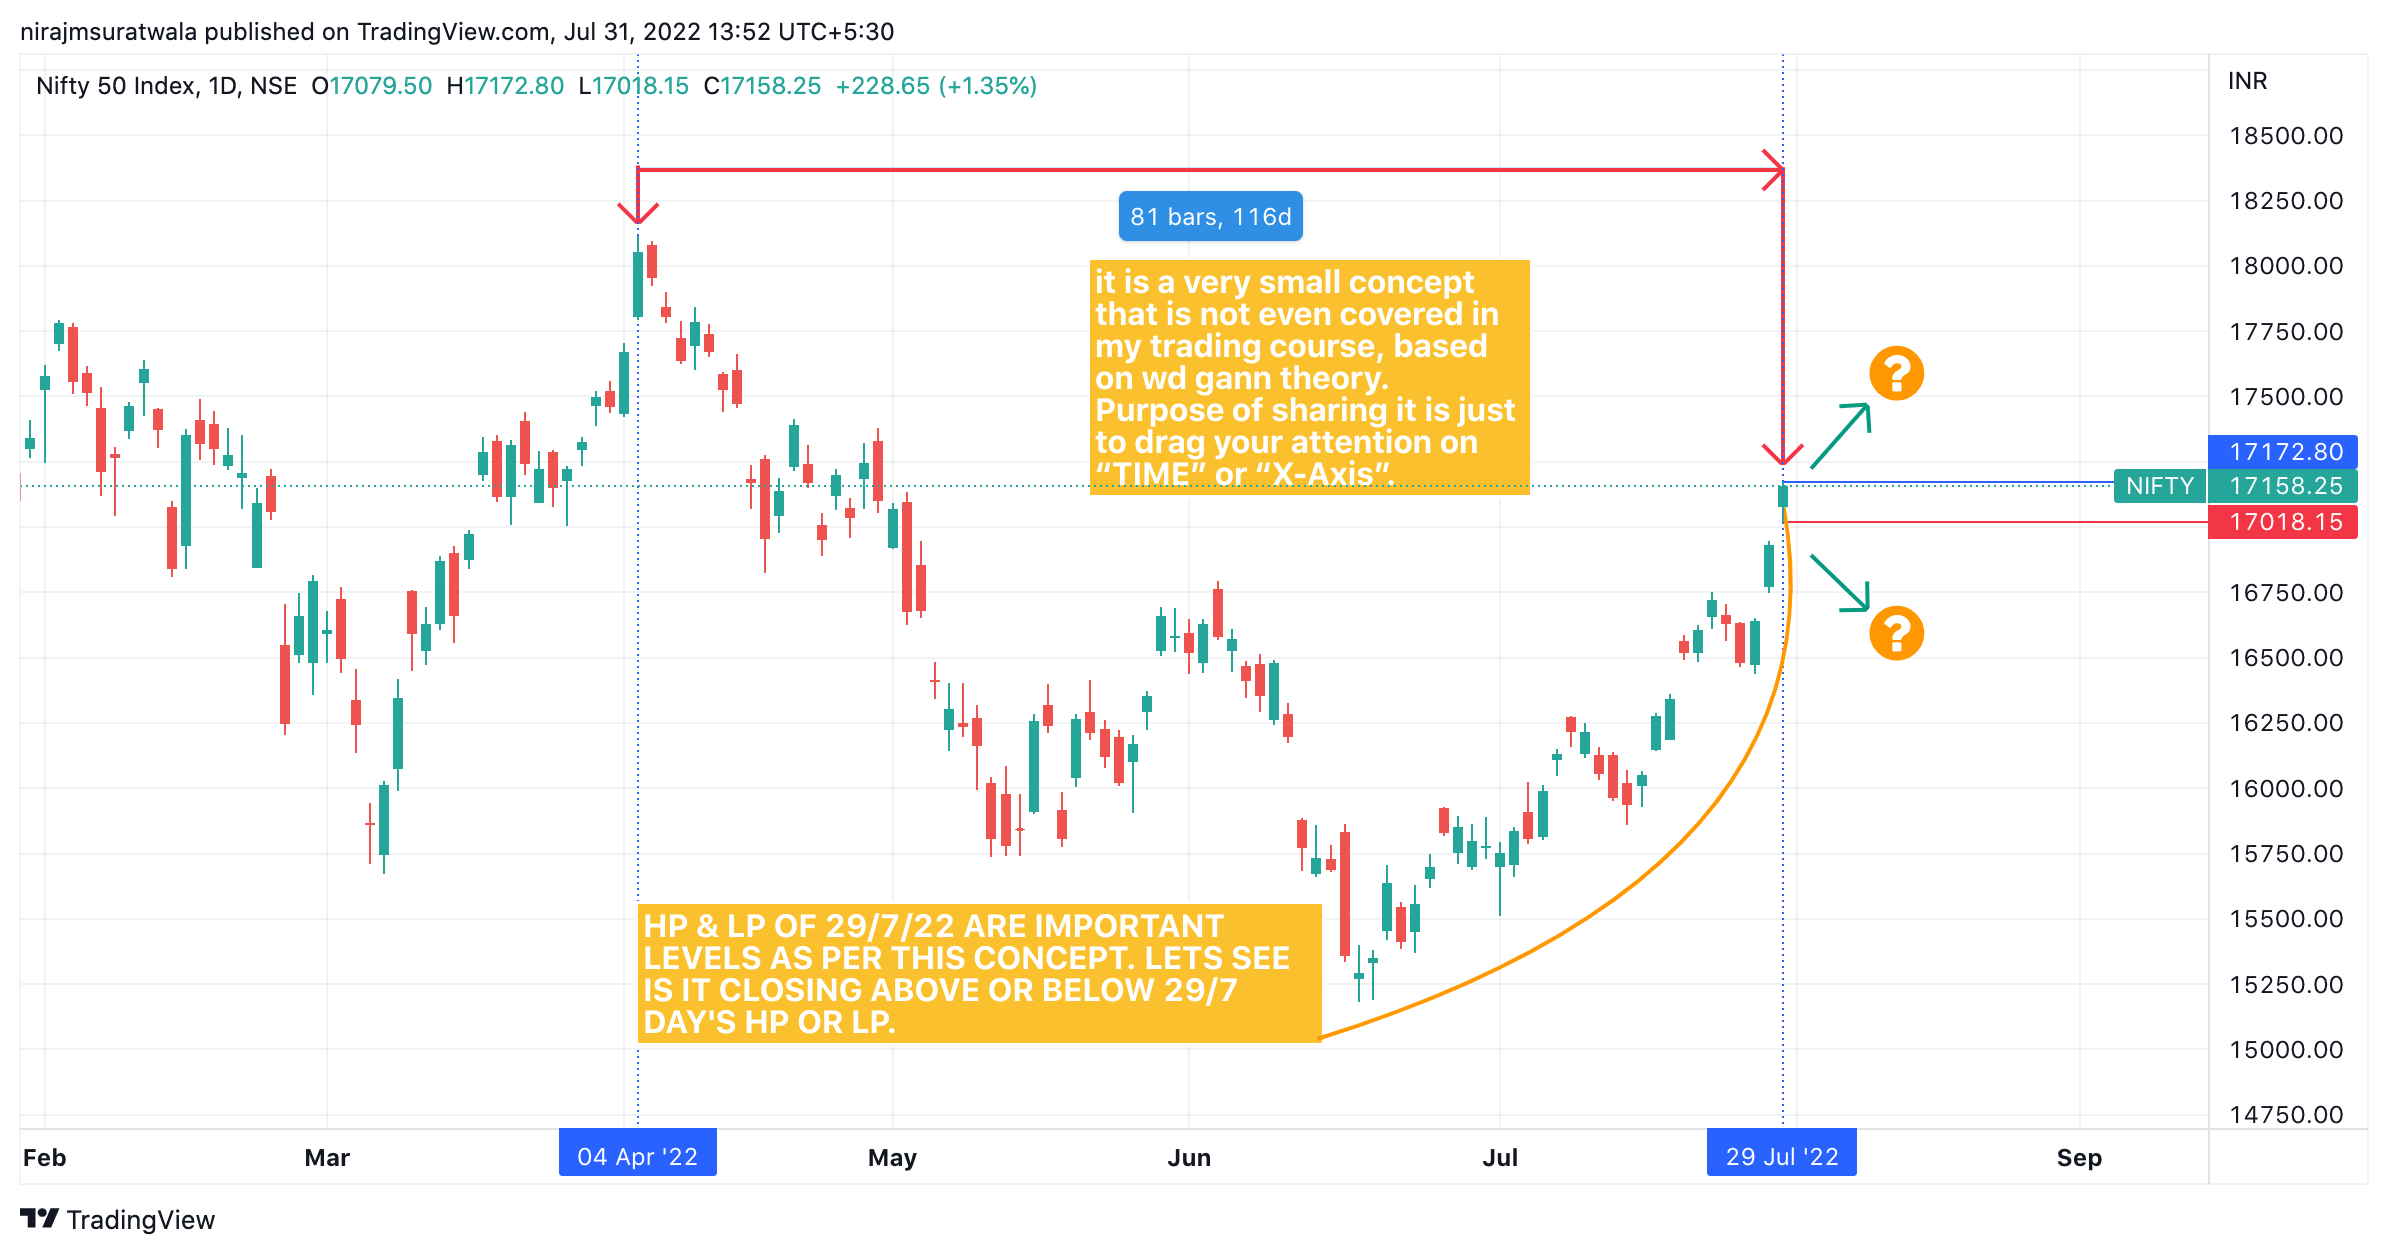 How to trade in nifty 50 is Explained wiht nifty outlook on 29/7/22 onwards